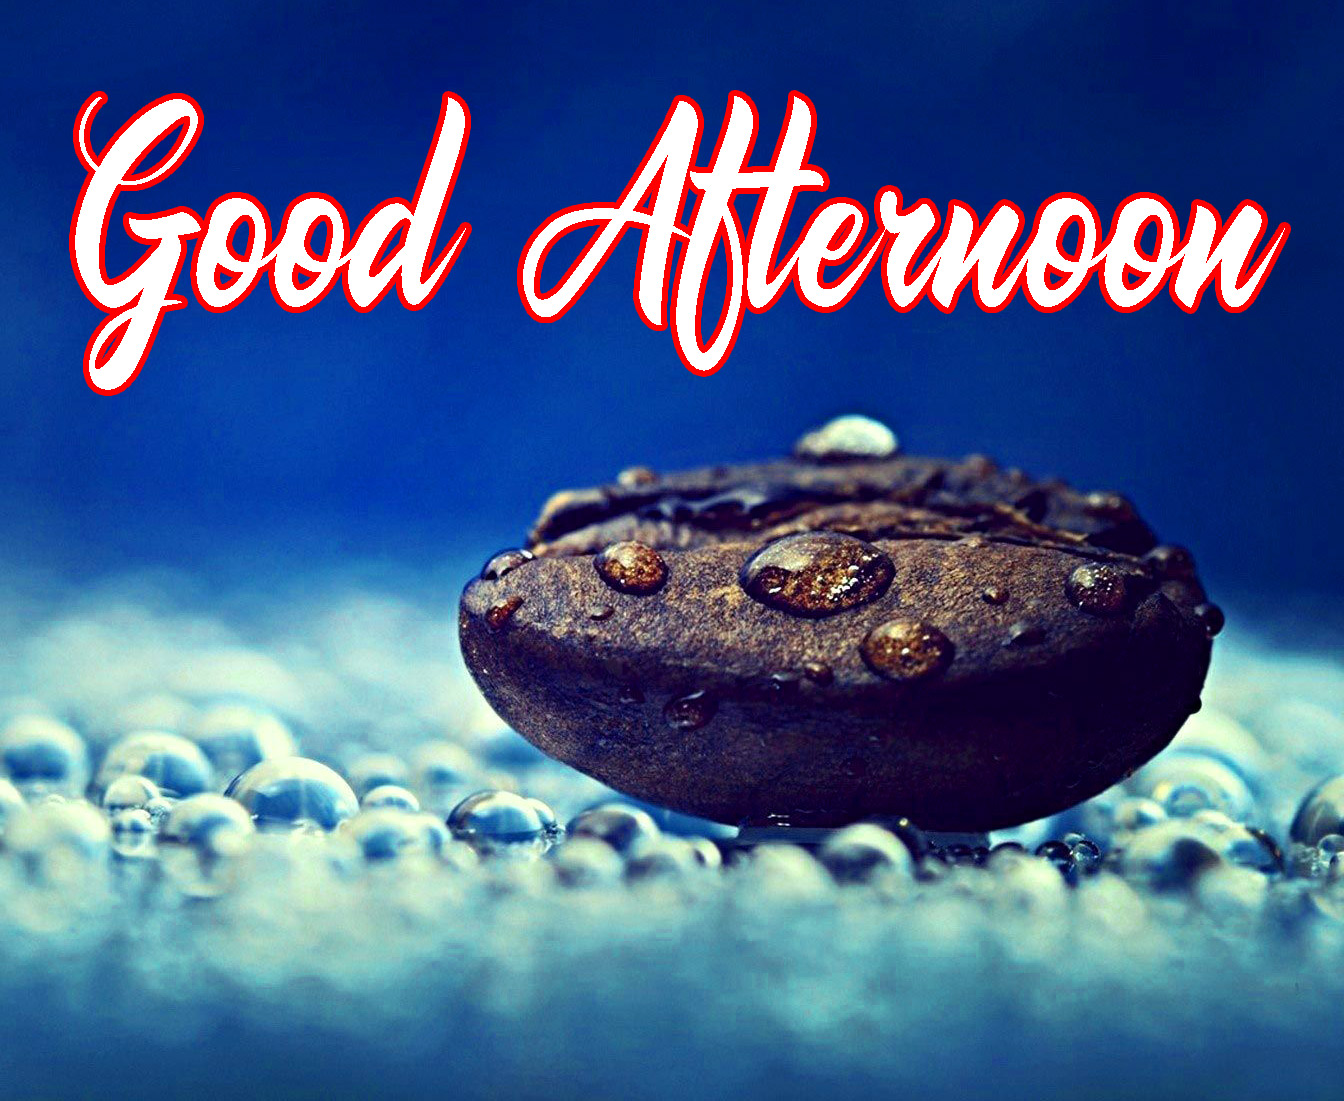 New Latest Free Good Afternoon HD Images Photo Download 